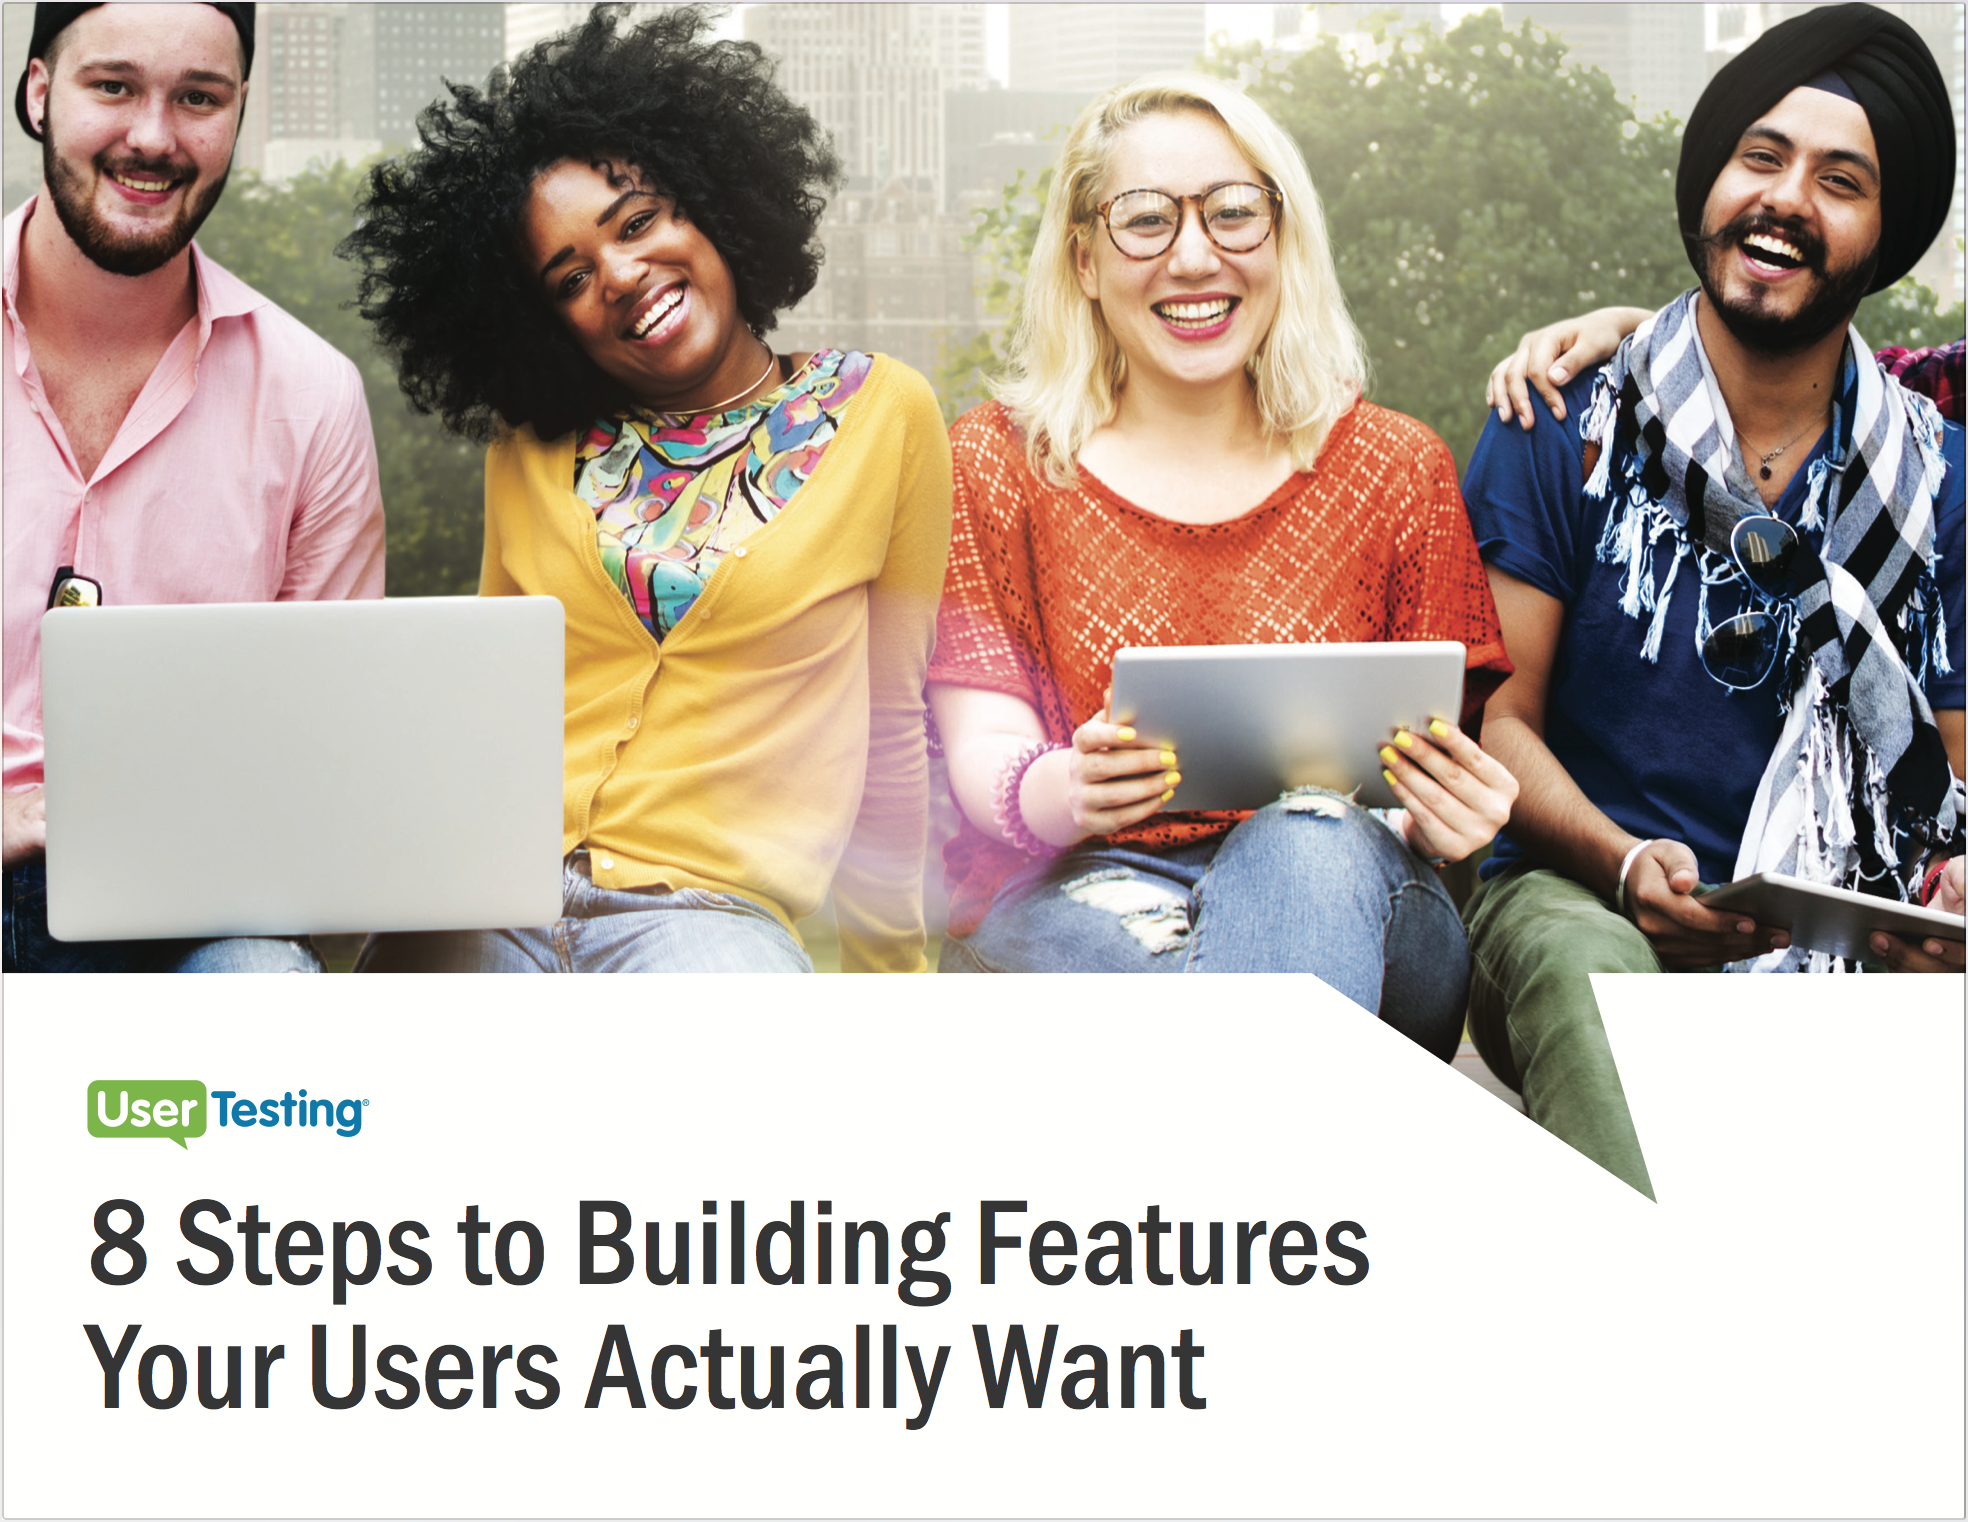 Free ebook: 8 Steps to Building Features Your Users Actually Want